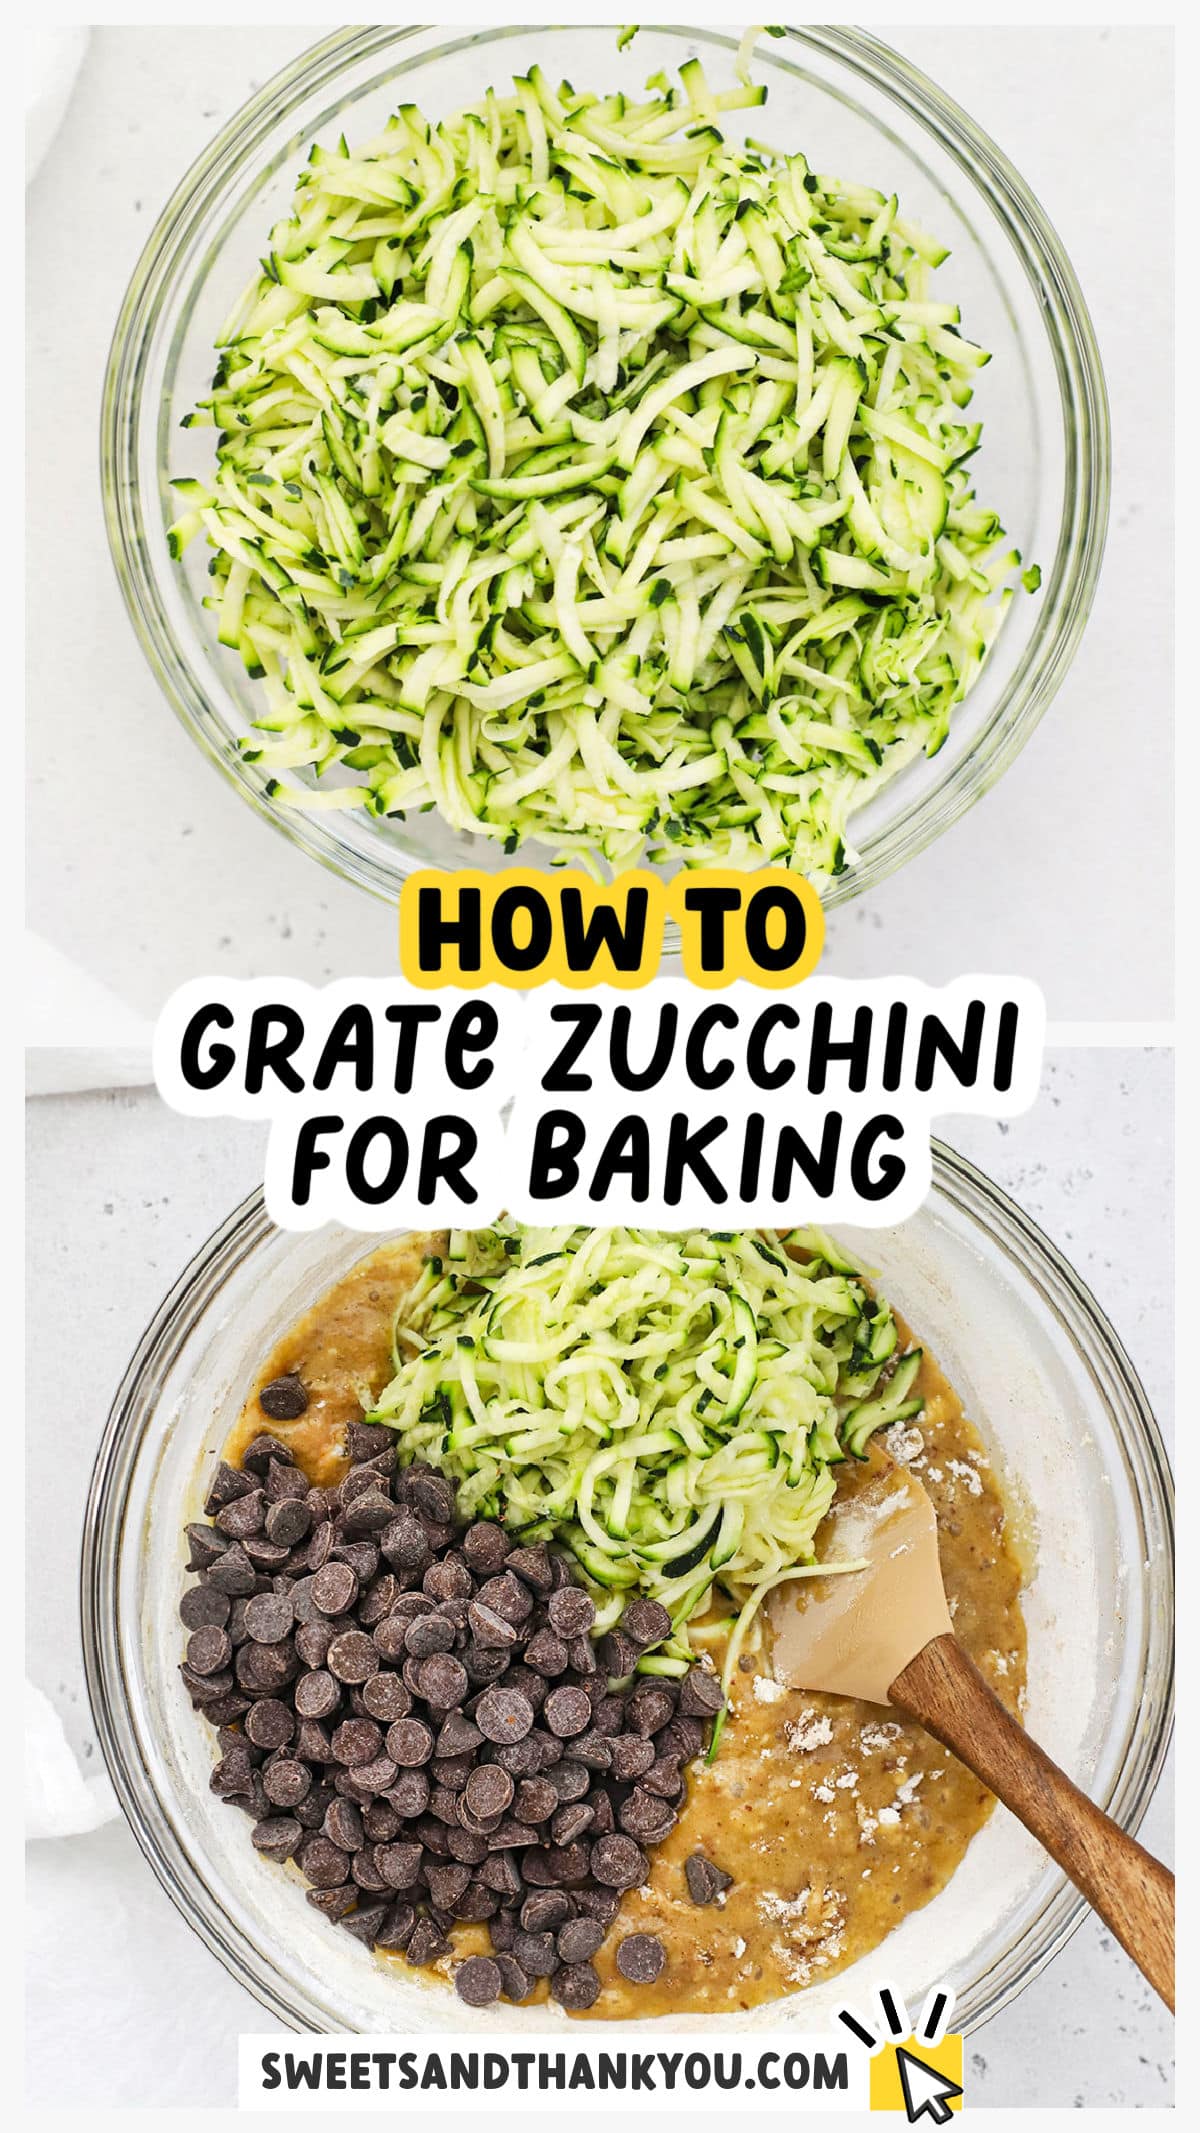 Learn how to grate zucchini for baking zucchini bread & cake, making meatballs & more with this easy tutorial. We'll walk you through how to choose the best zucchini, how to shred zucchini with a food processor or box grater AND +10 delicious zucchini recipes to try! Get the full tutorial and recipes at Sweets & Thank You!